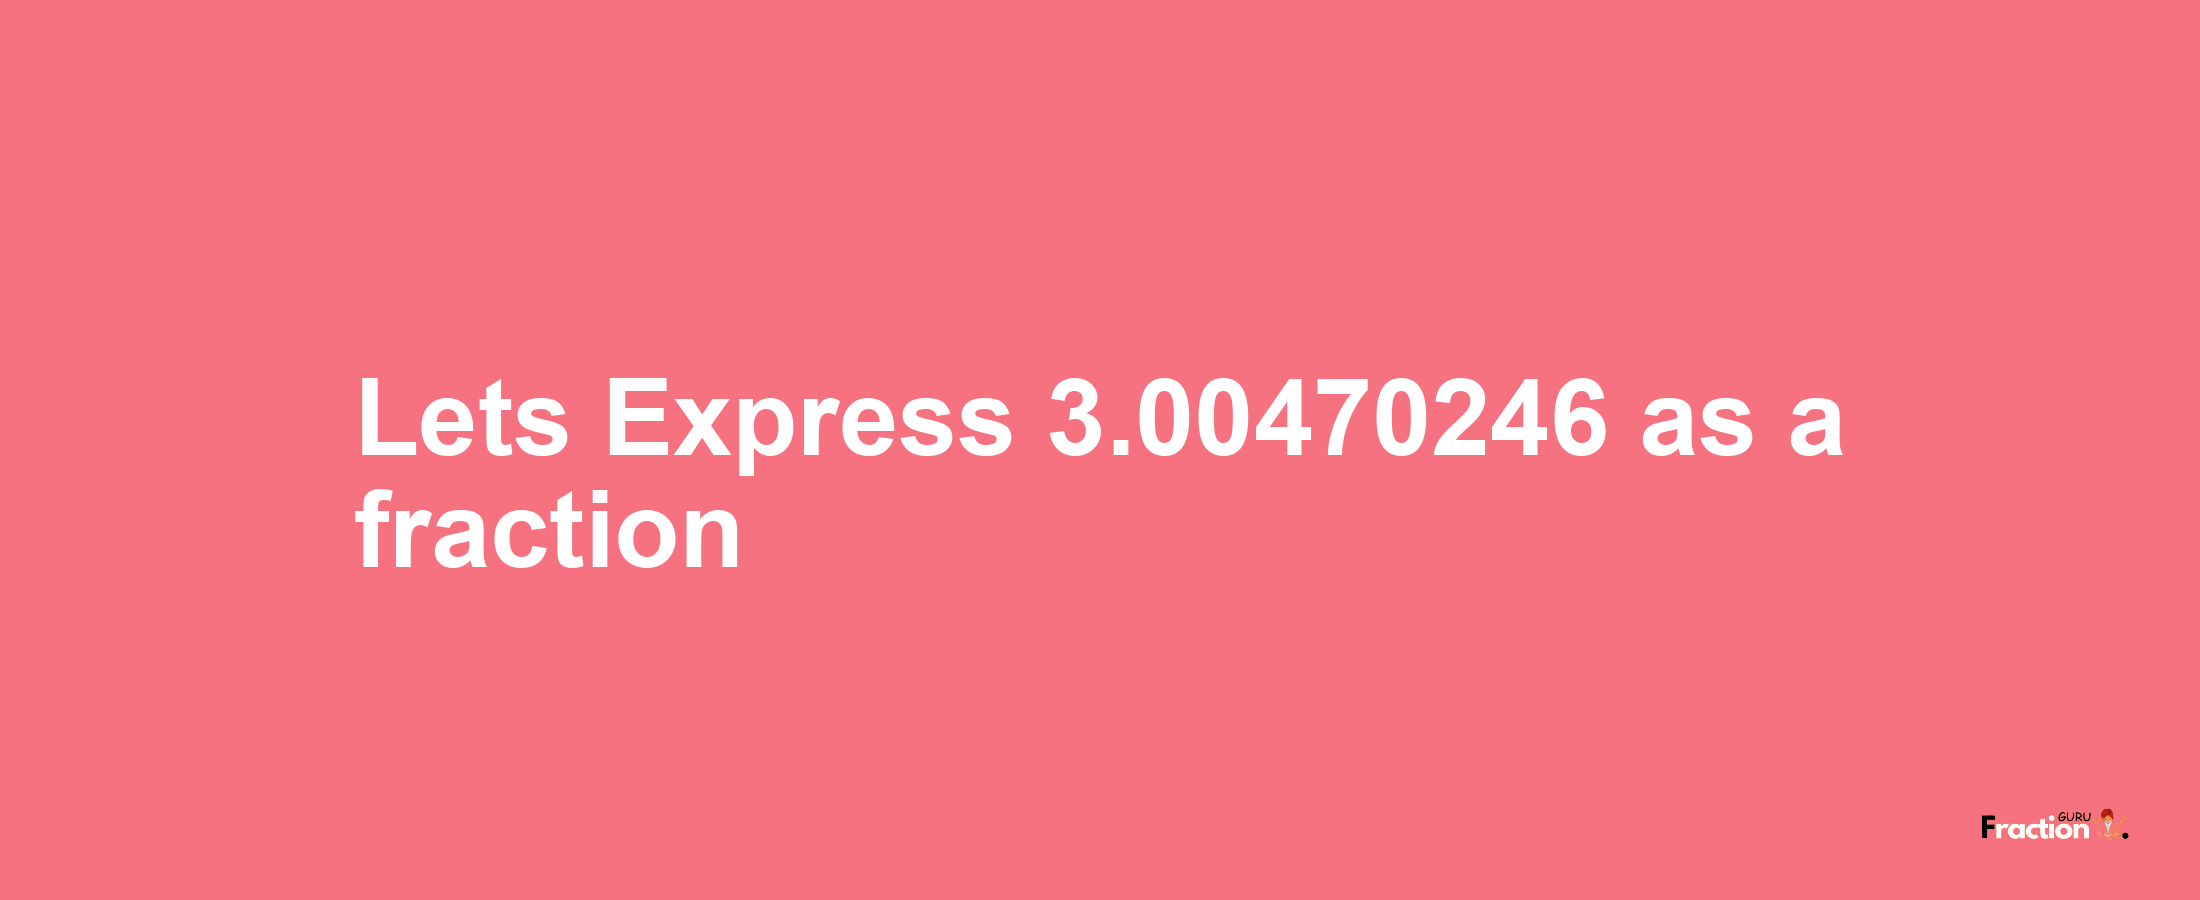 Lets Express 3.00470246 as afraction